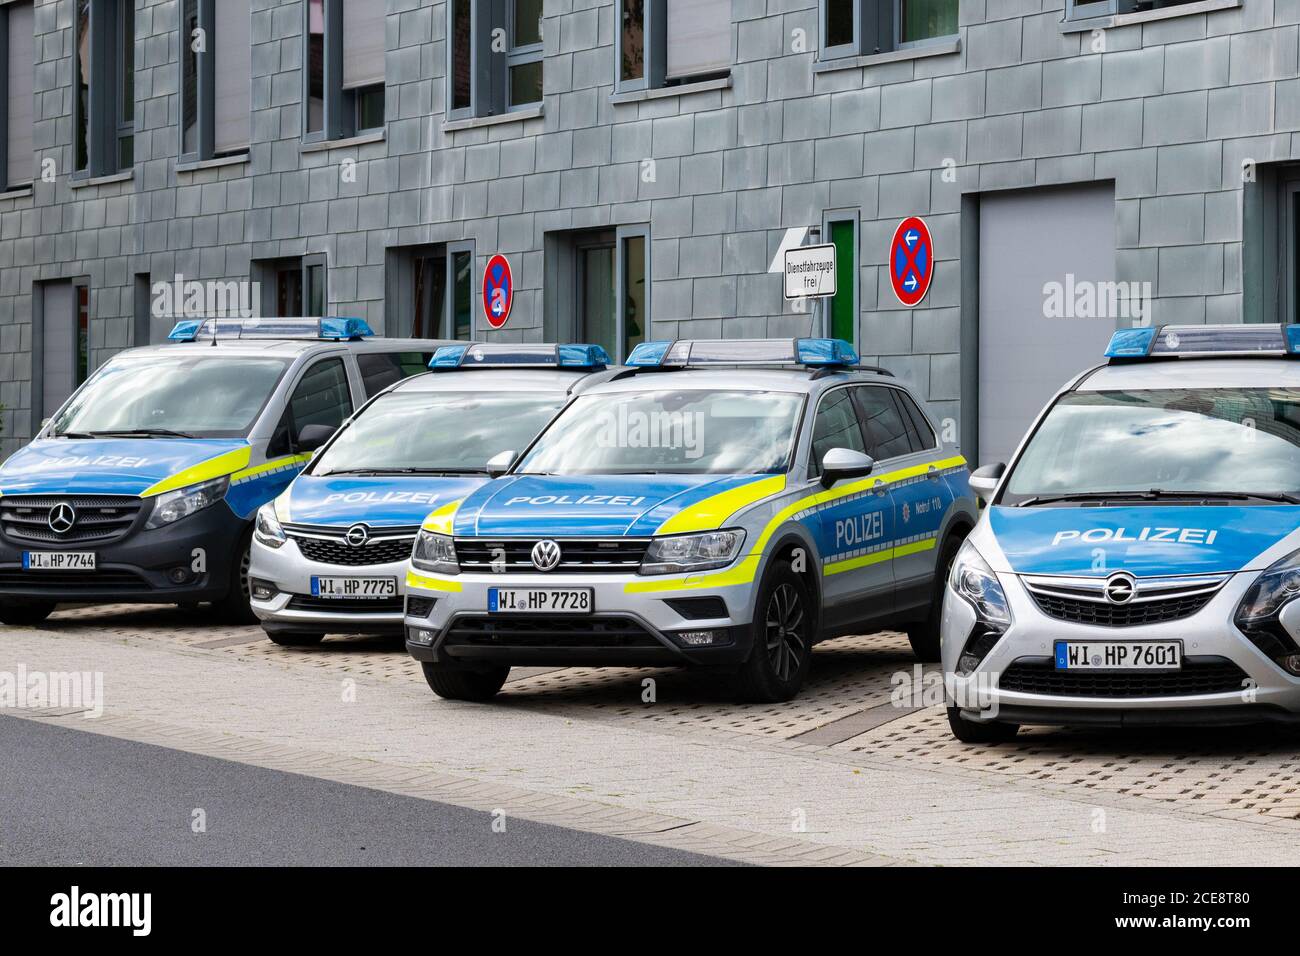 Police cars parked outside police station, Idstein, Hesse, Germany Stock Photo